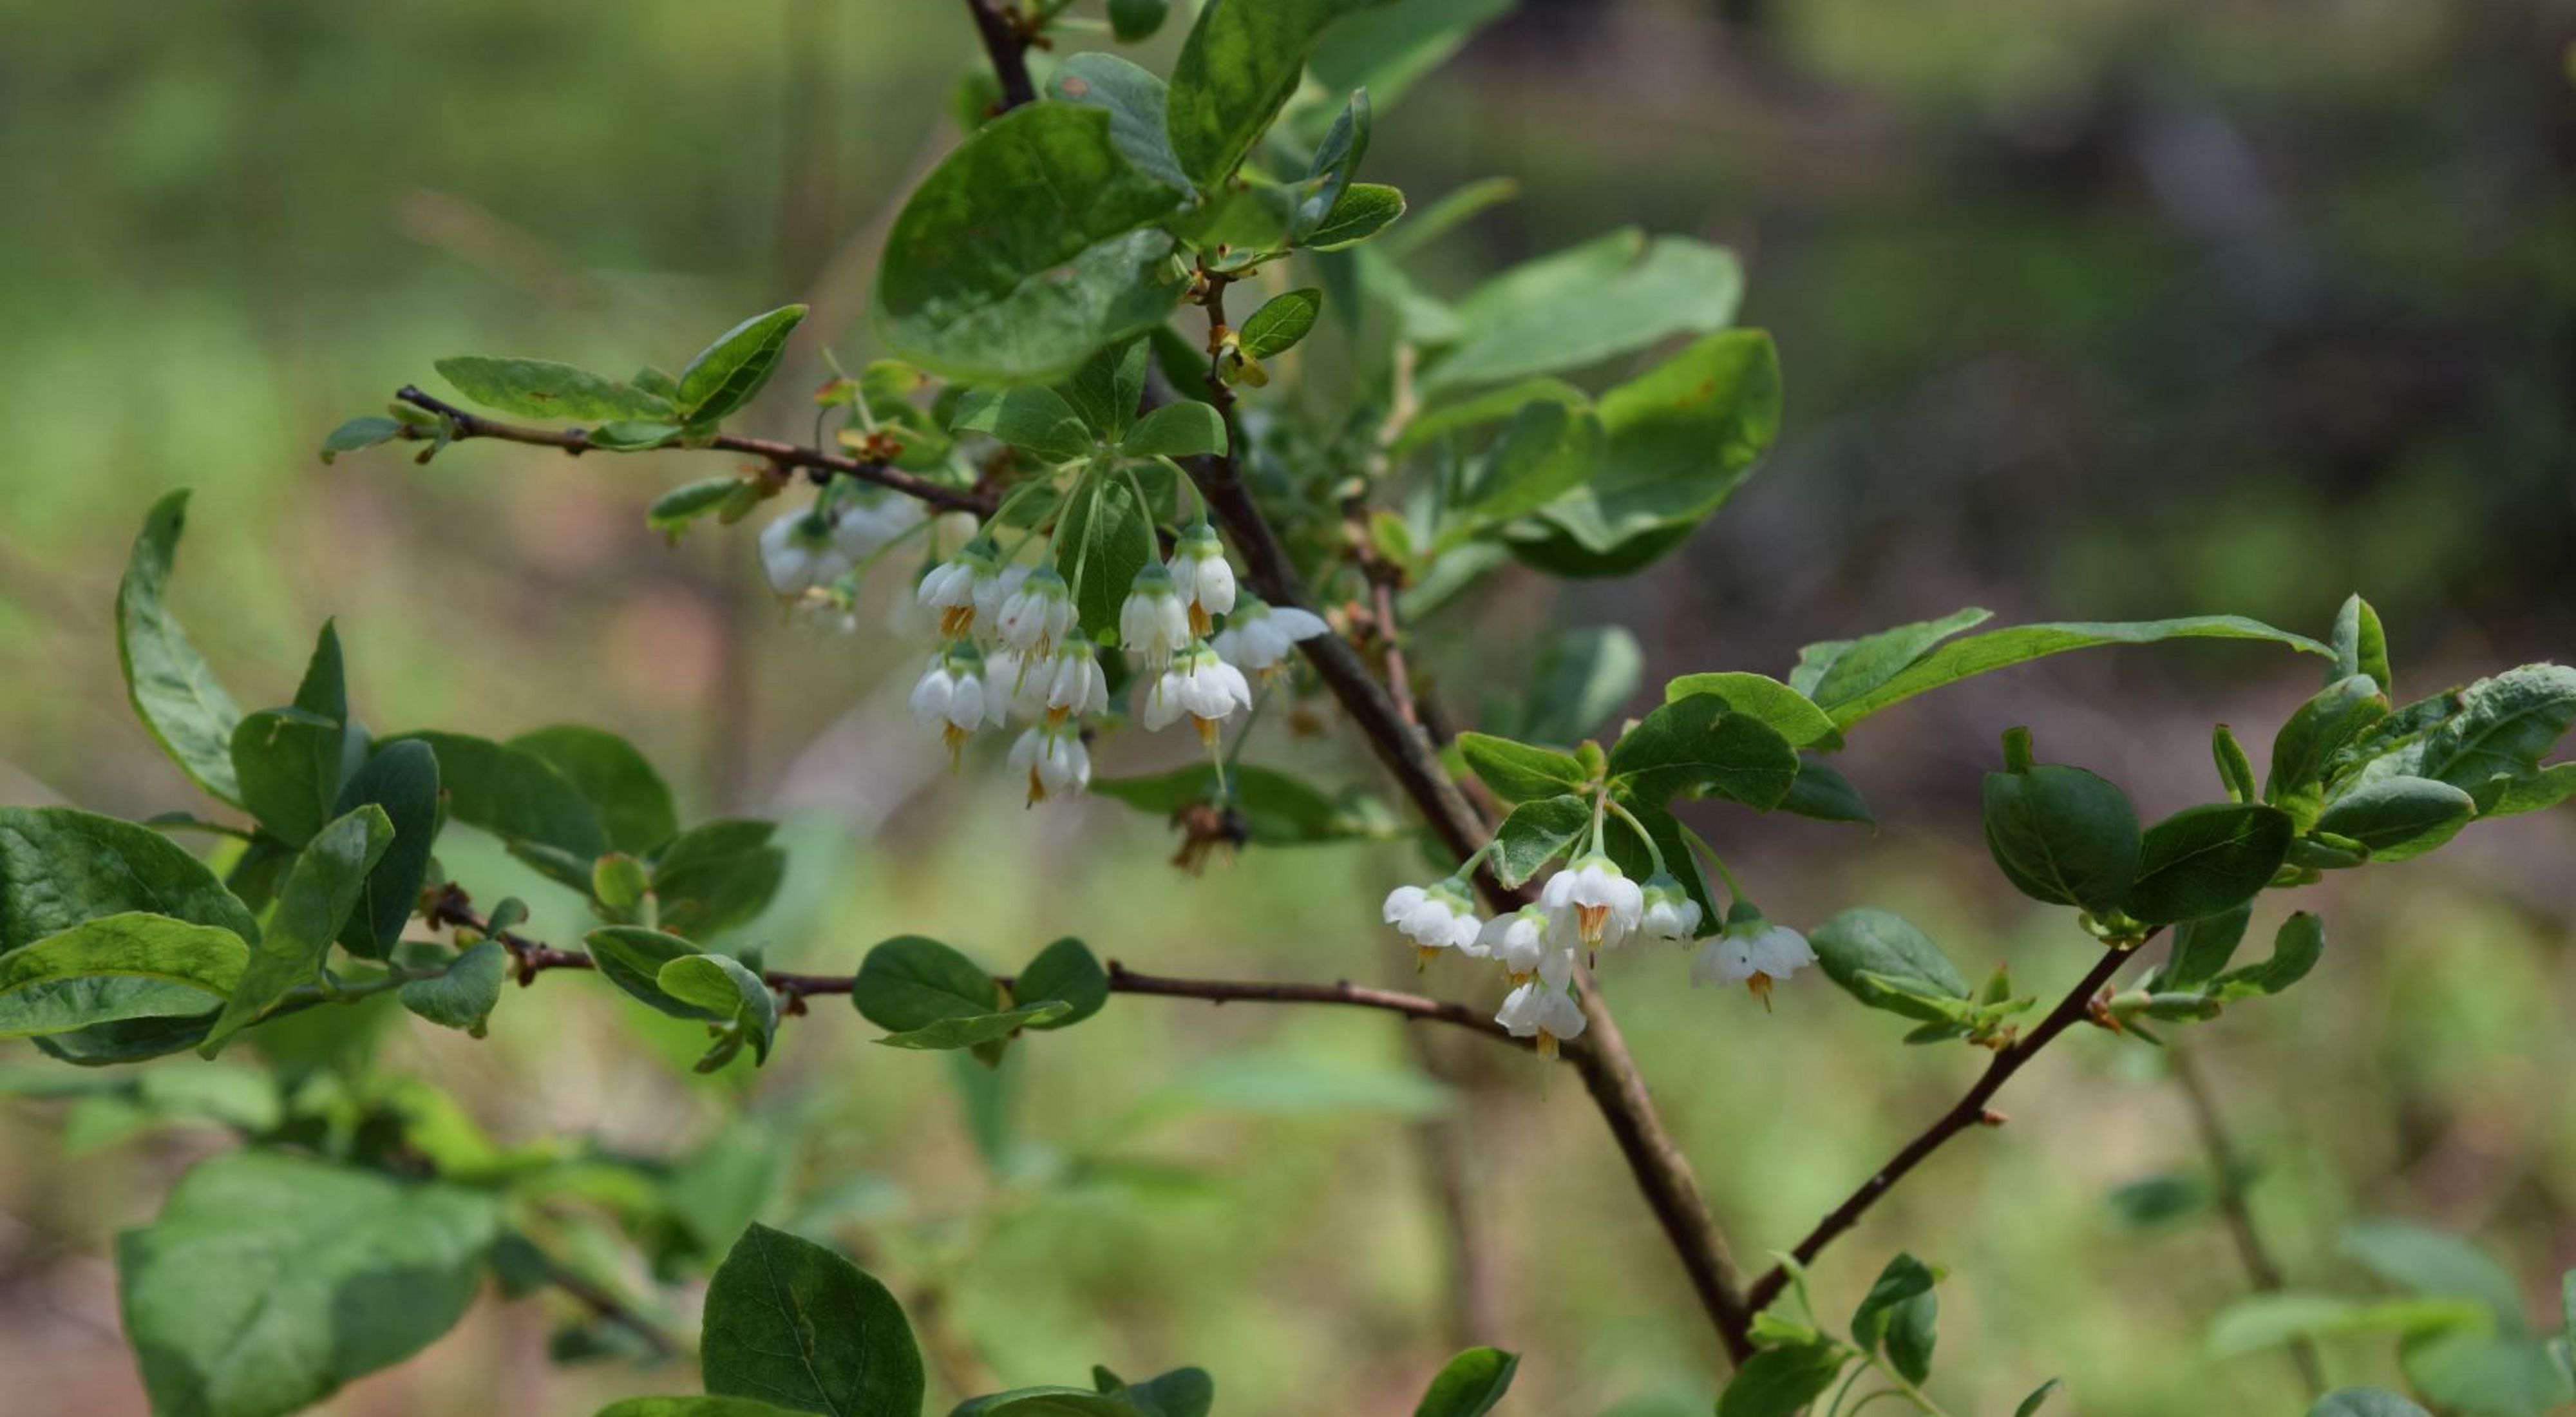 A bush grows with green leaves and down turned white flowers on its branches. 